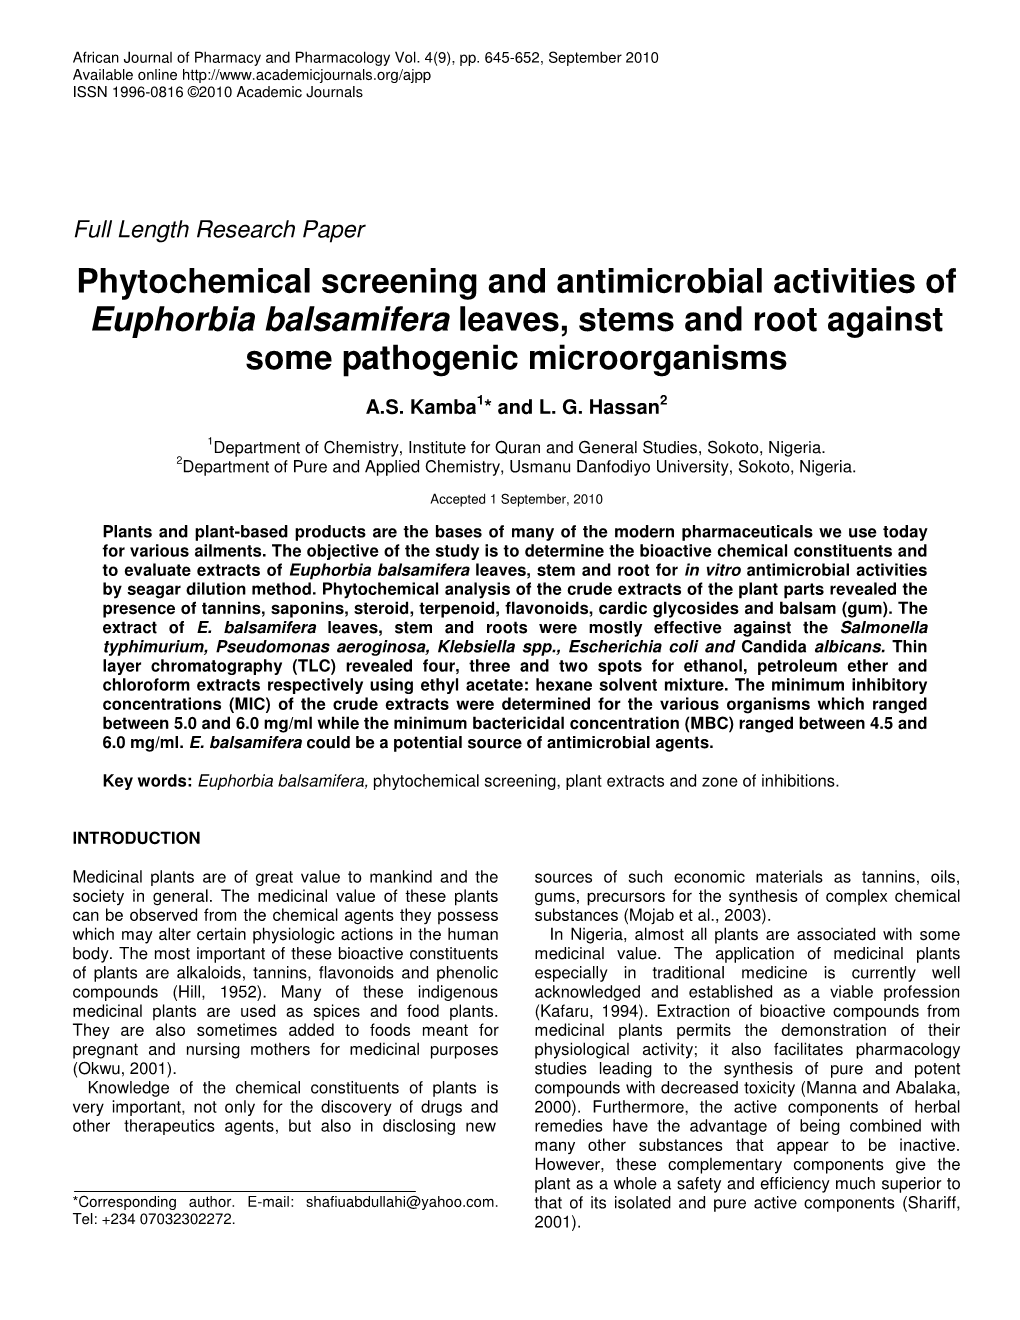 Phytochemical Screening and Antimicrobial Activities of Euphorbia Balsamifera Leaves, Stems and Root Against Some Pathogenic Microorganisms